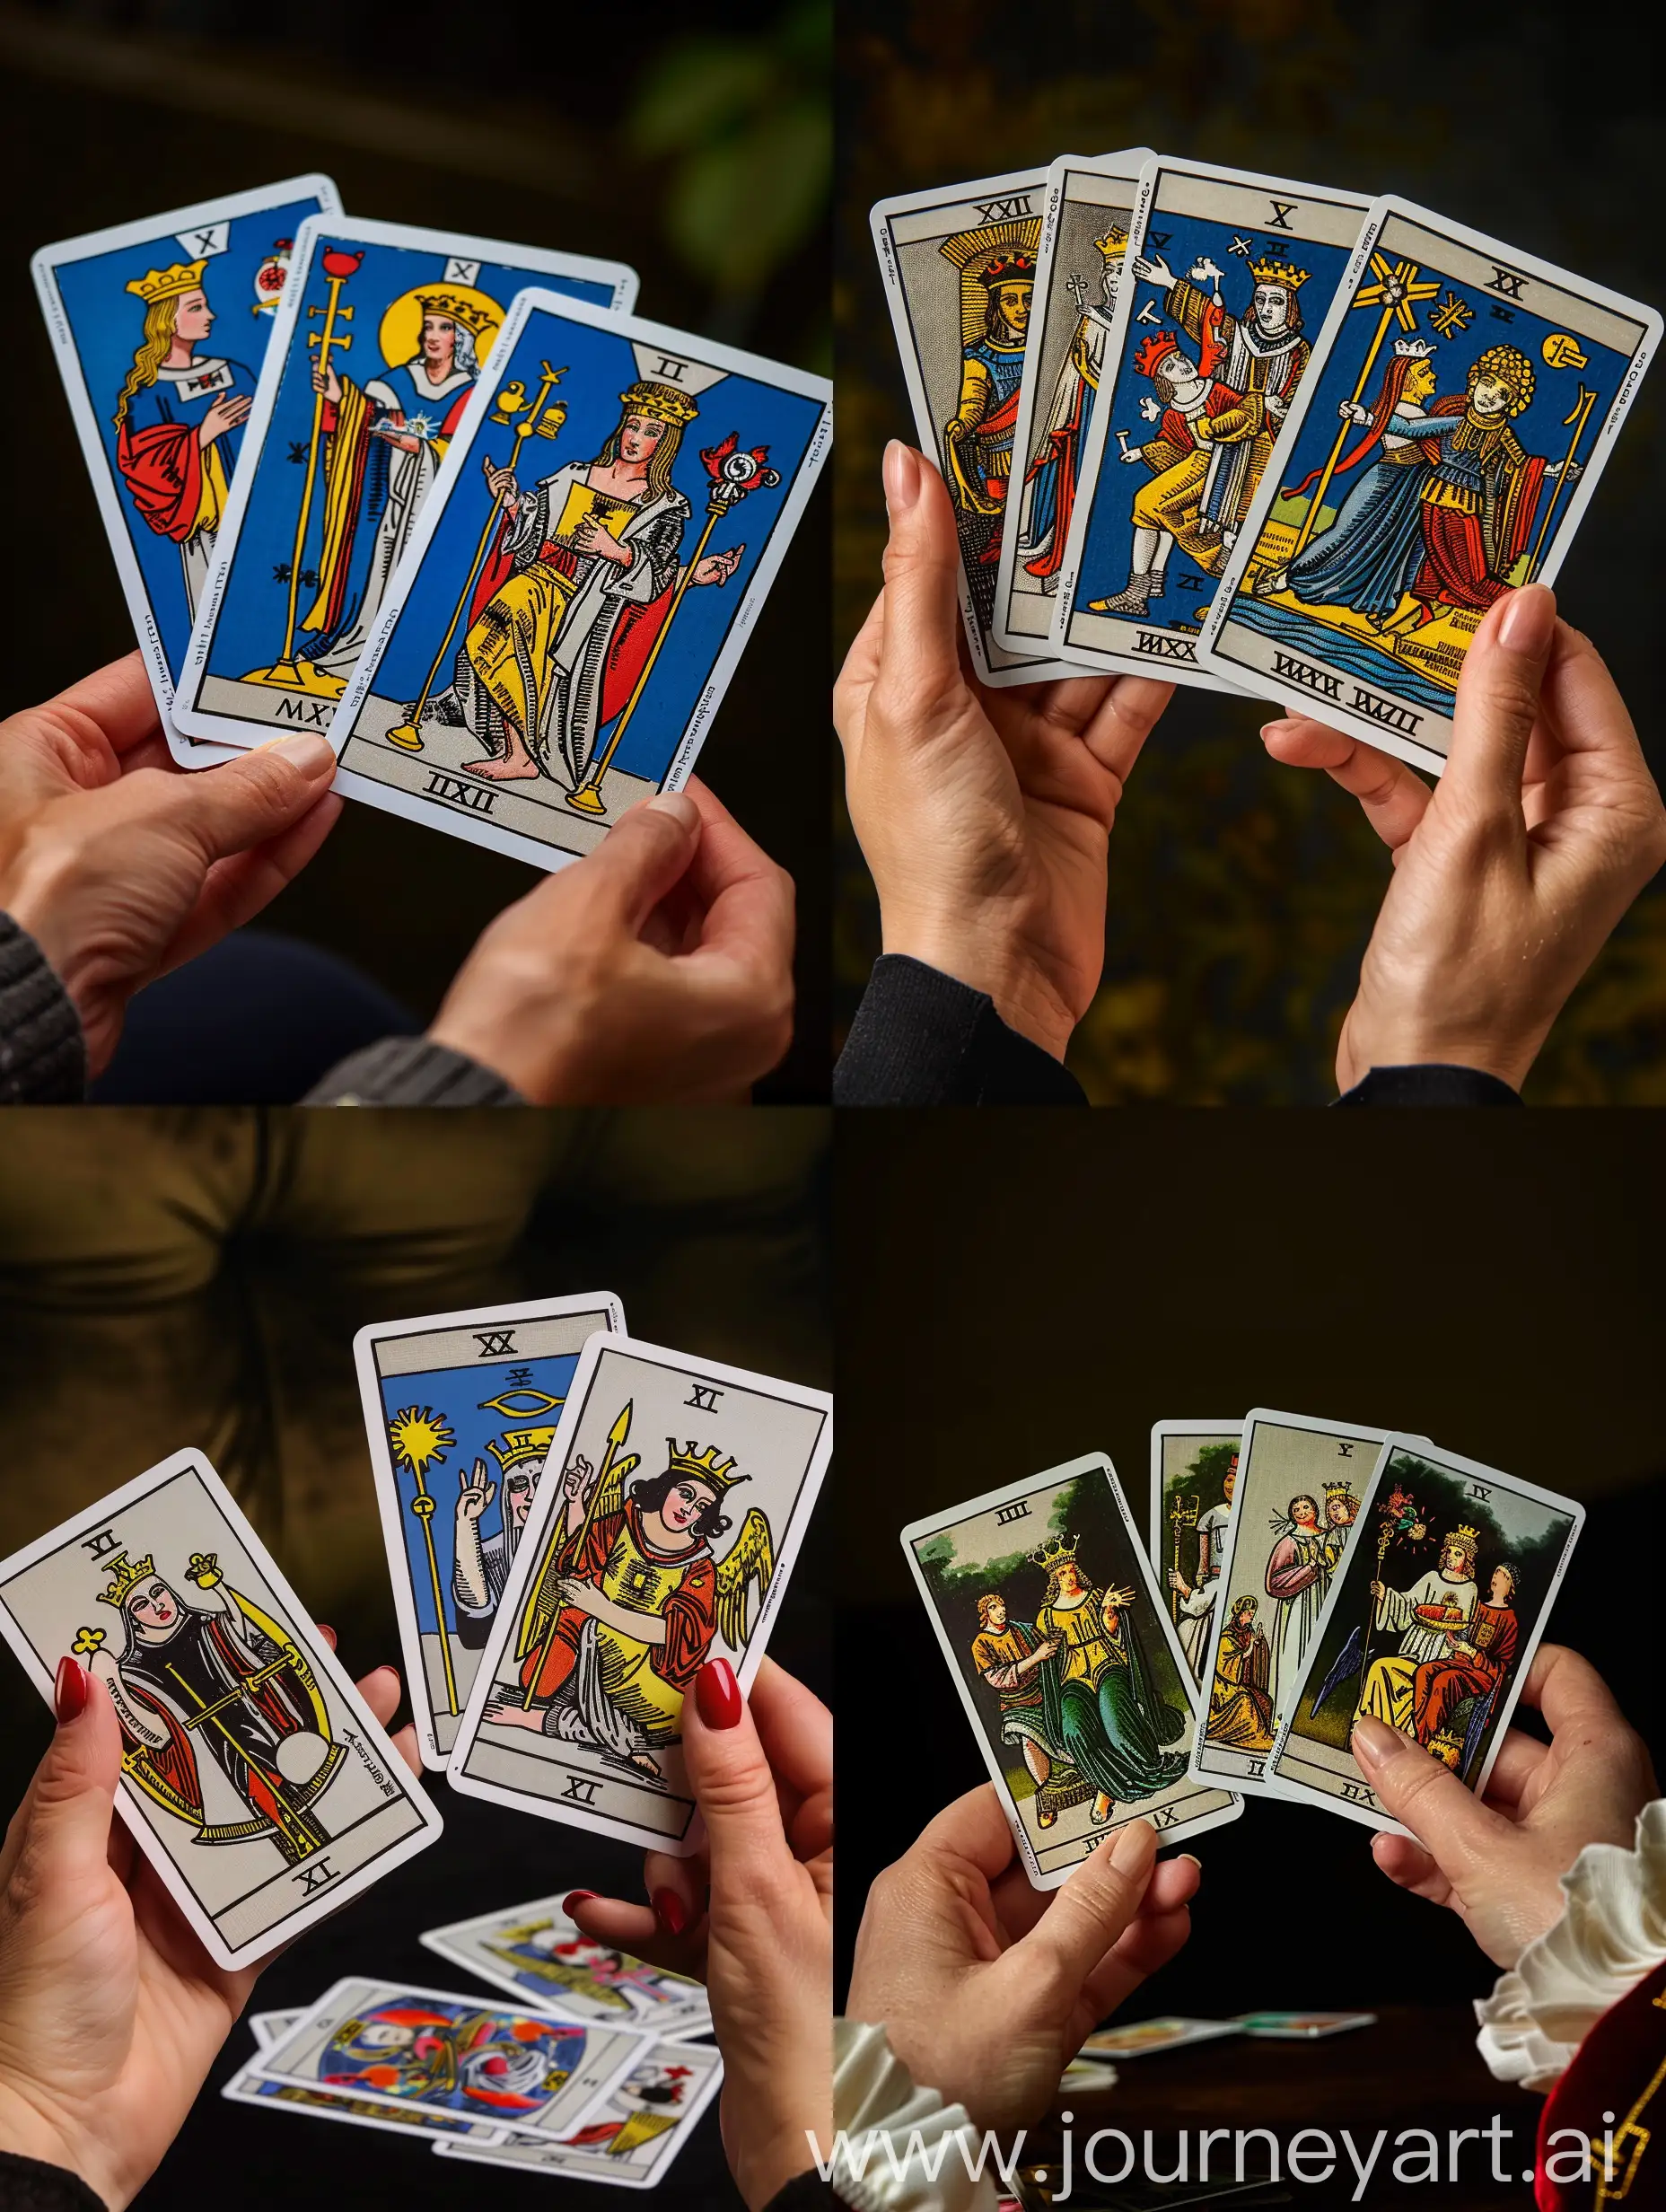 Hands holding tarot cards on a dark background
